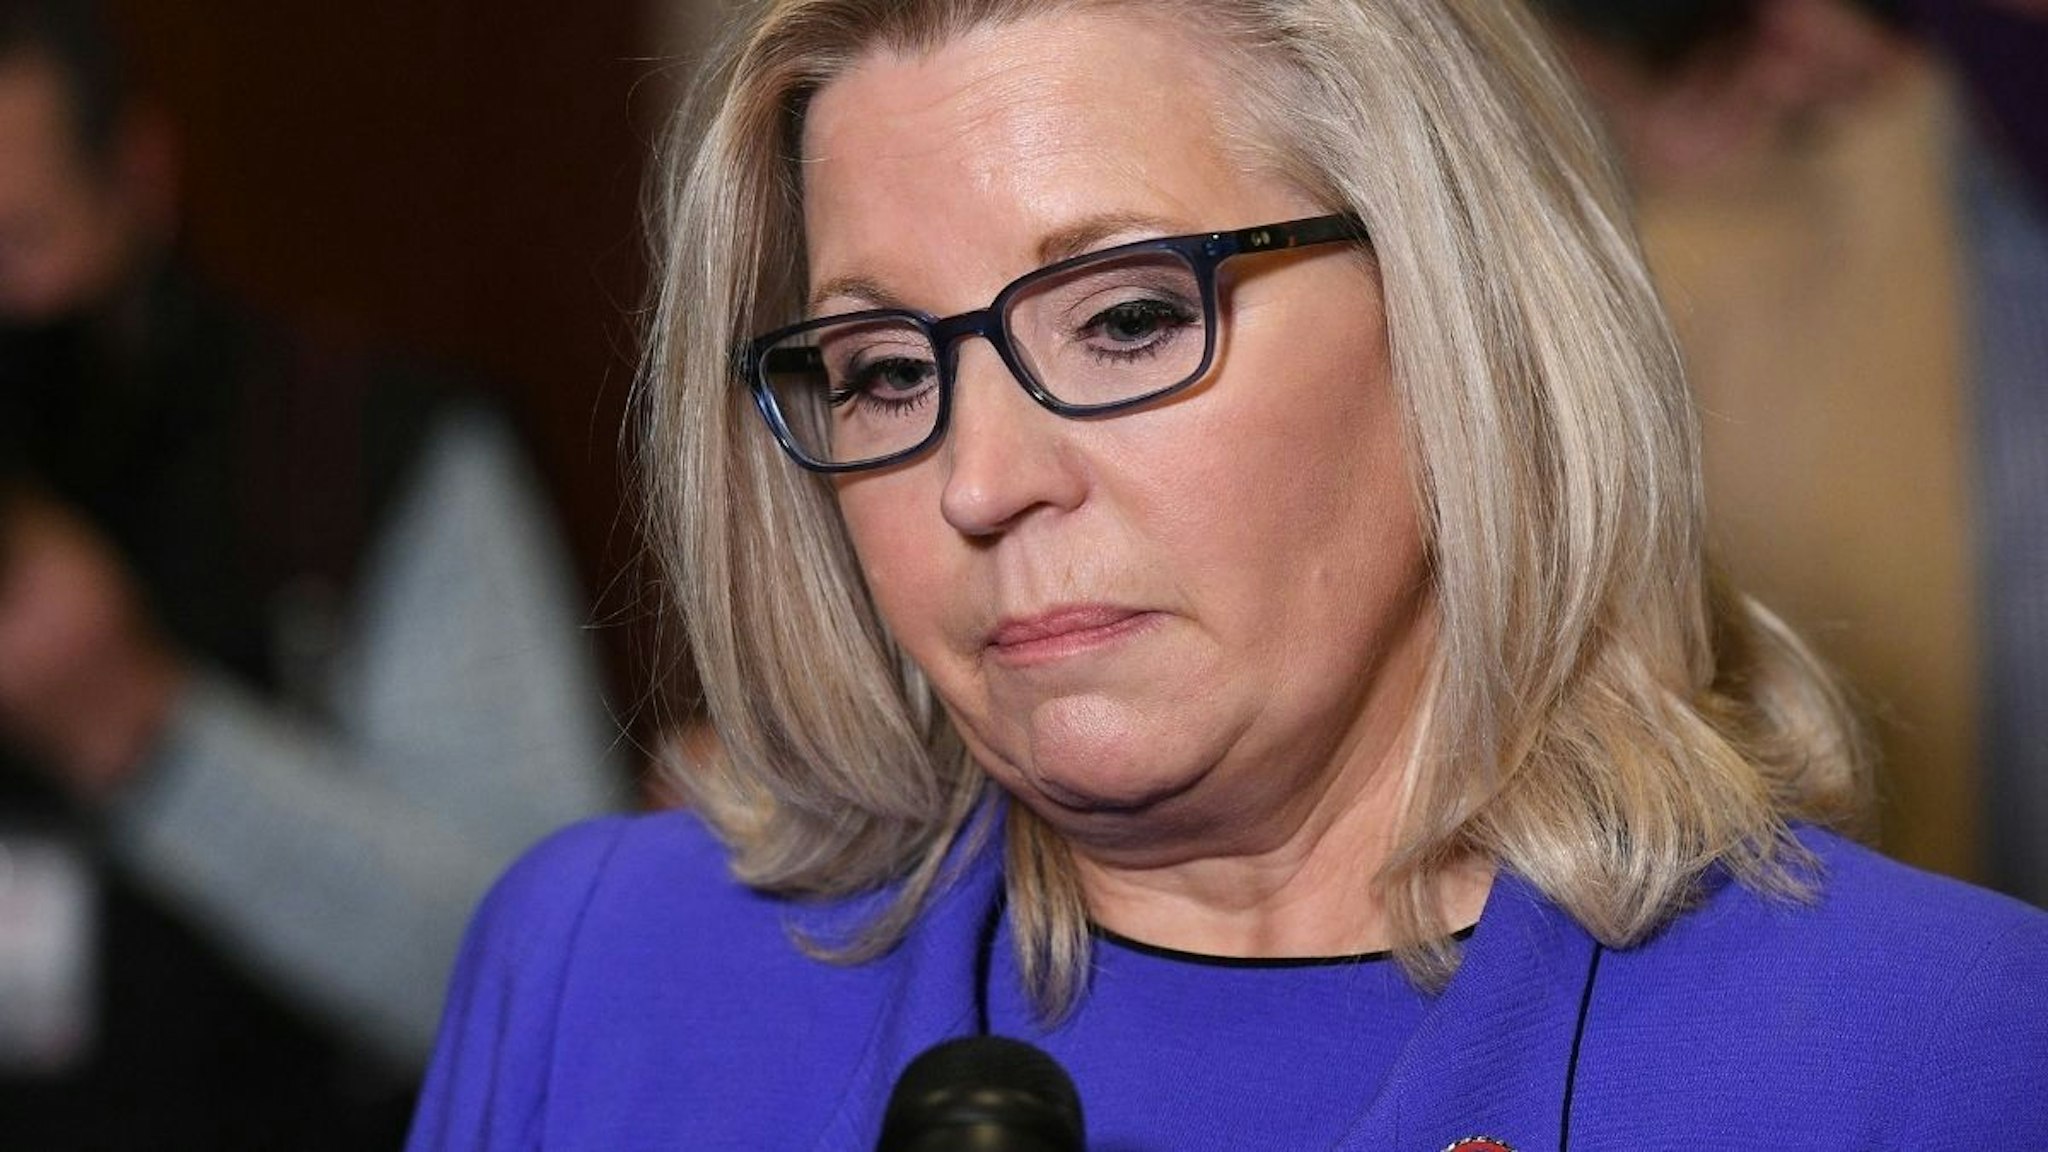 US Representative Liz Cheney, Republican of Wyoming, speaks to the media at the US Capitol in Washington, DC, on May 12, 2021.